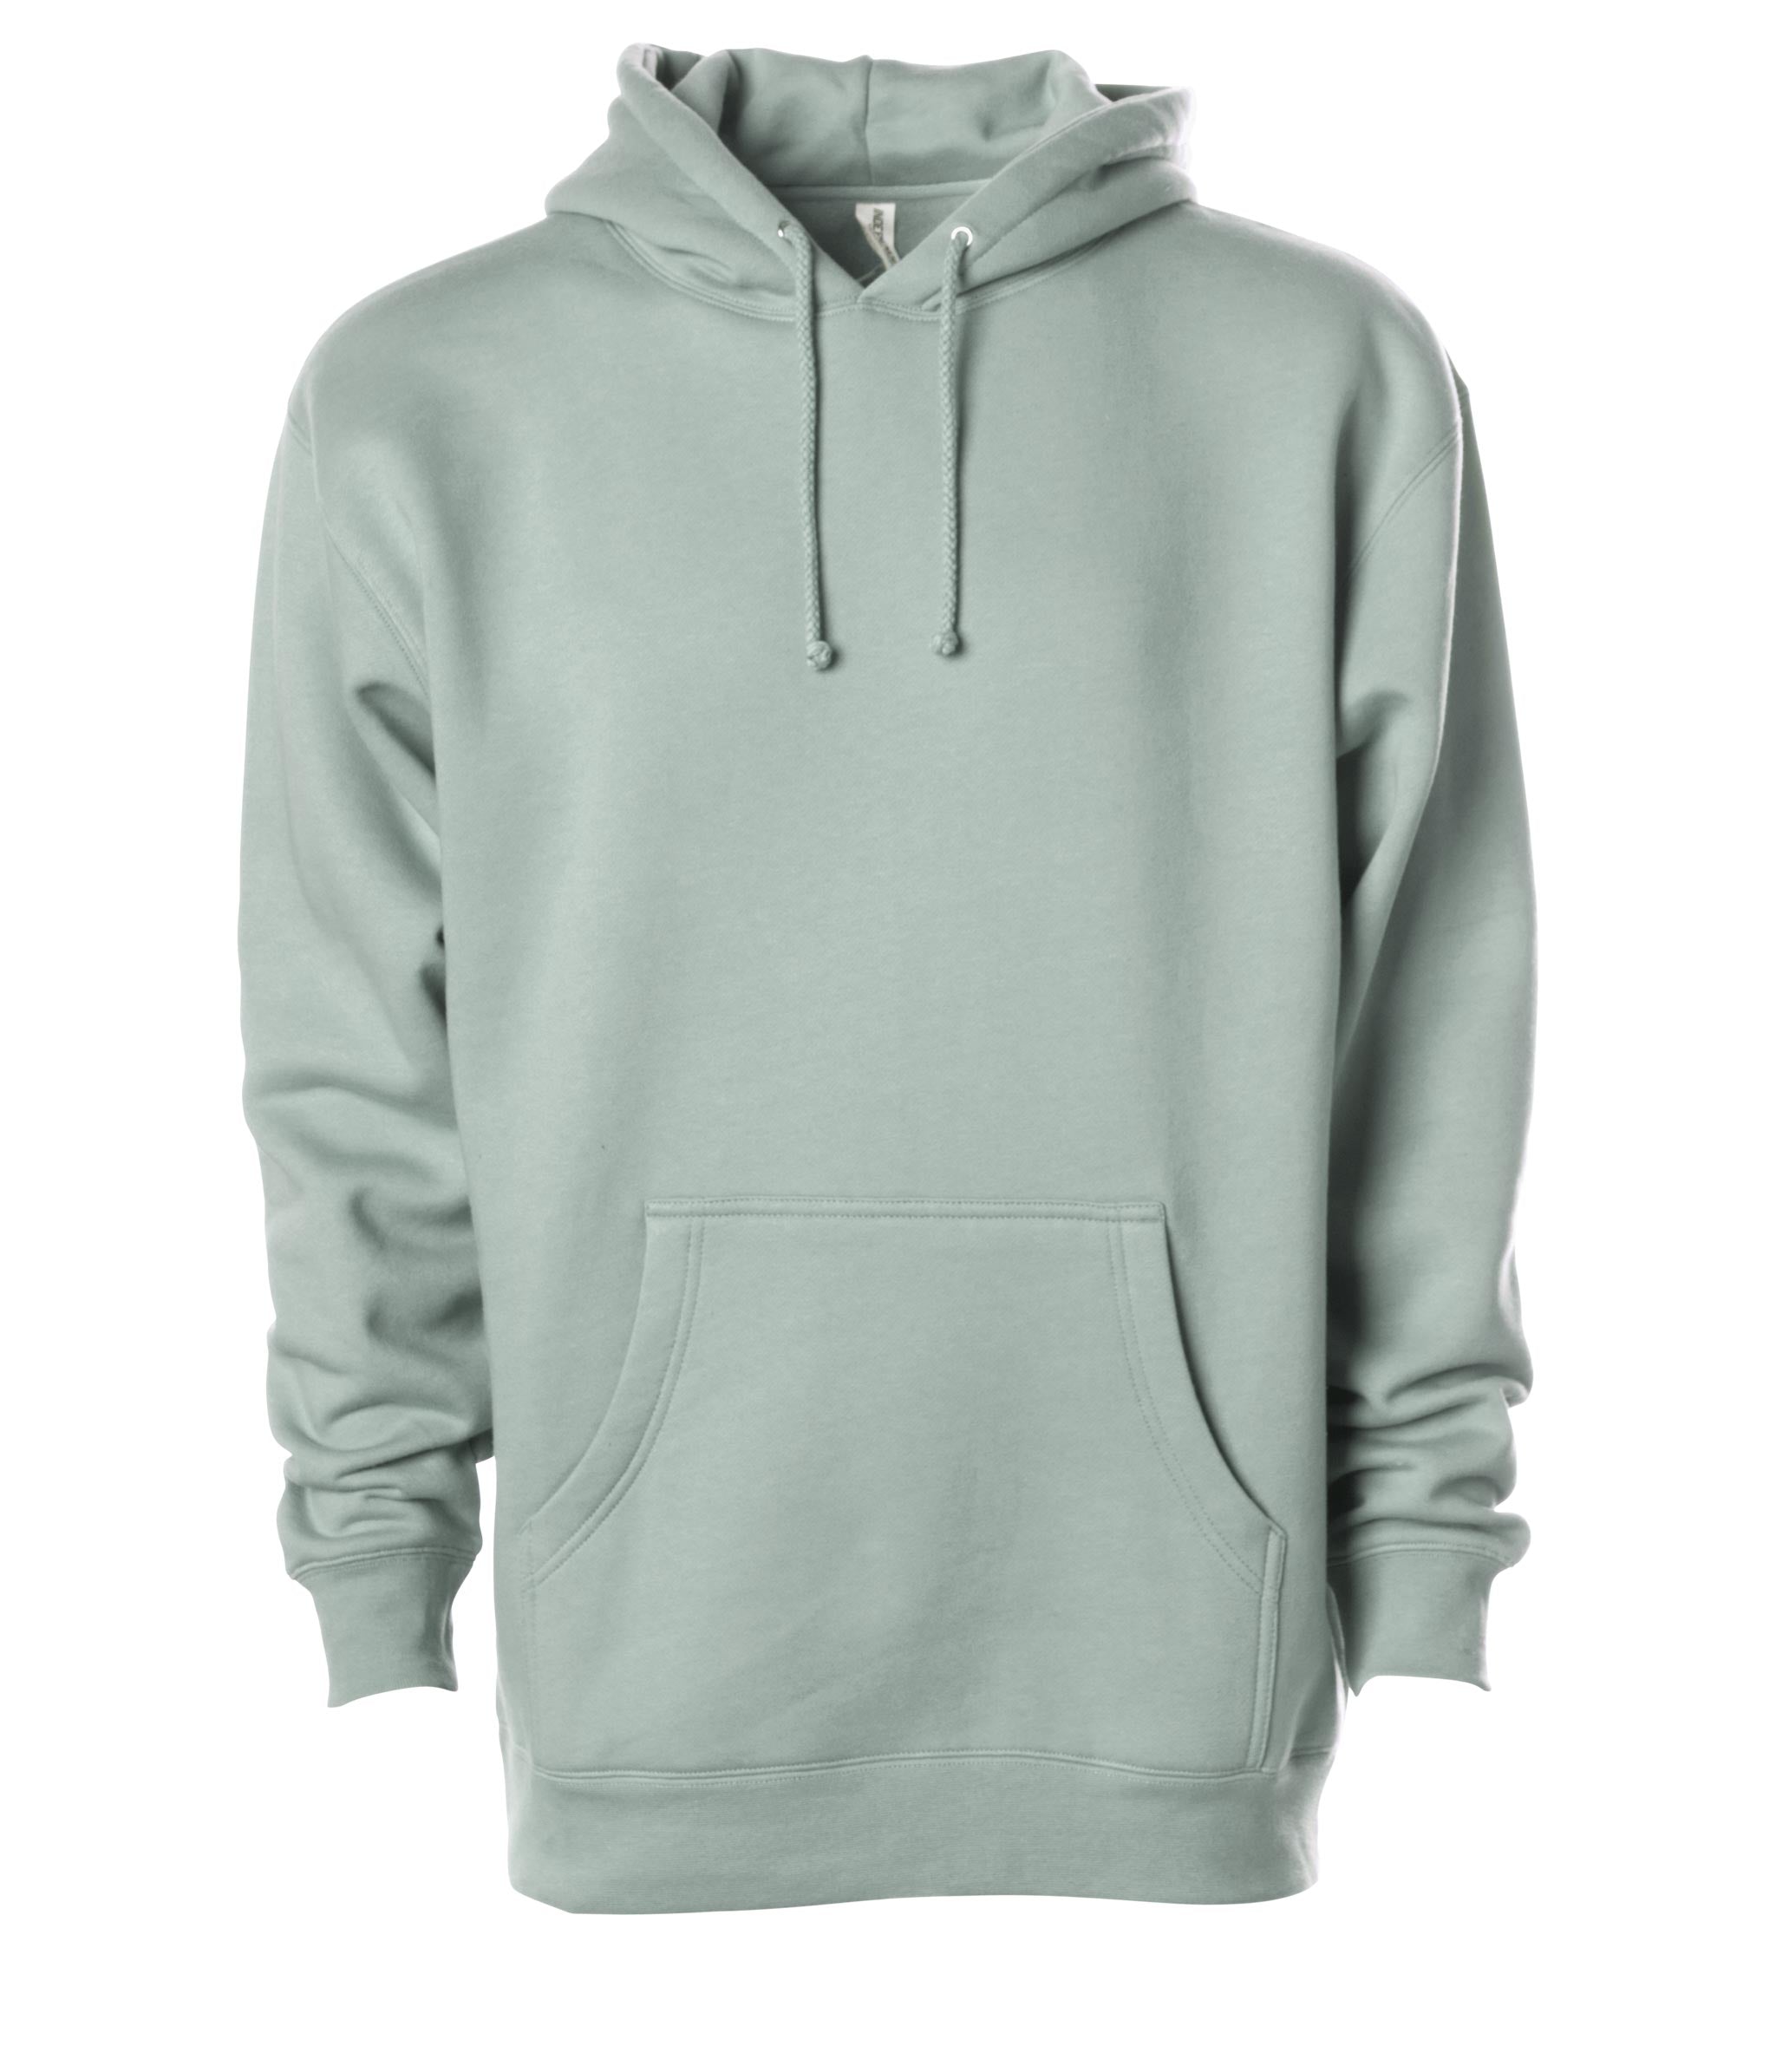 Independent Heavyweight Hooded Pullover Sweatshirt, Dusty Sage / SM